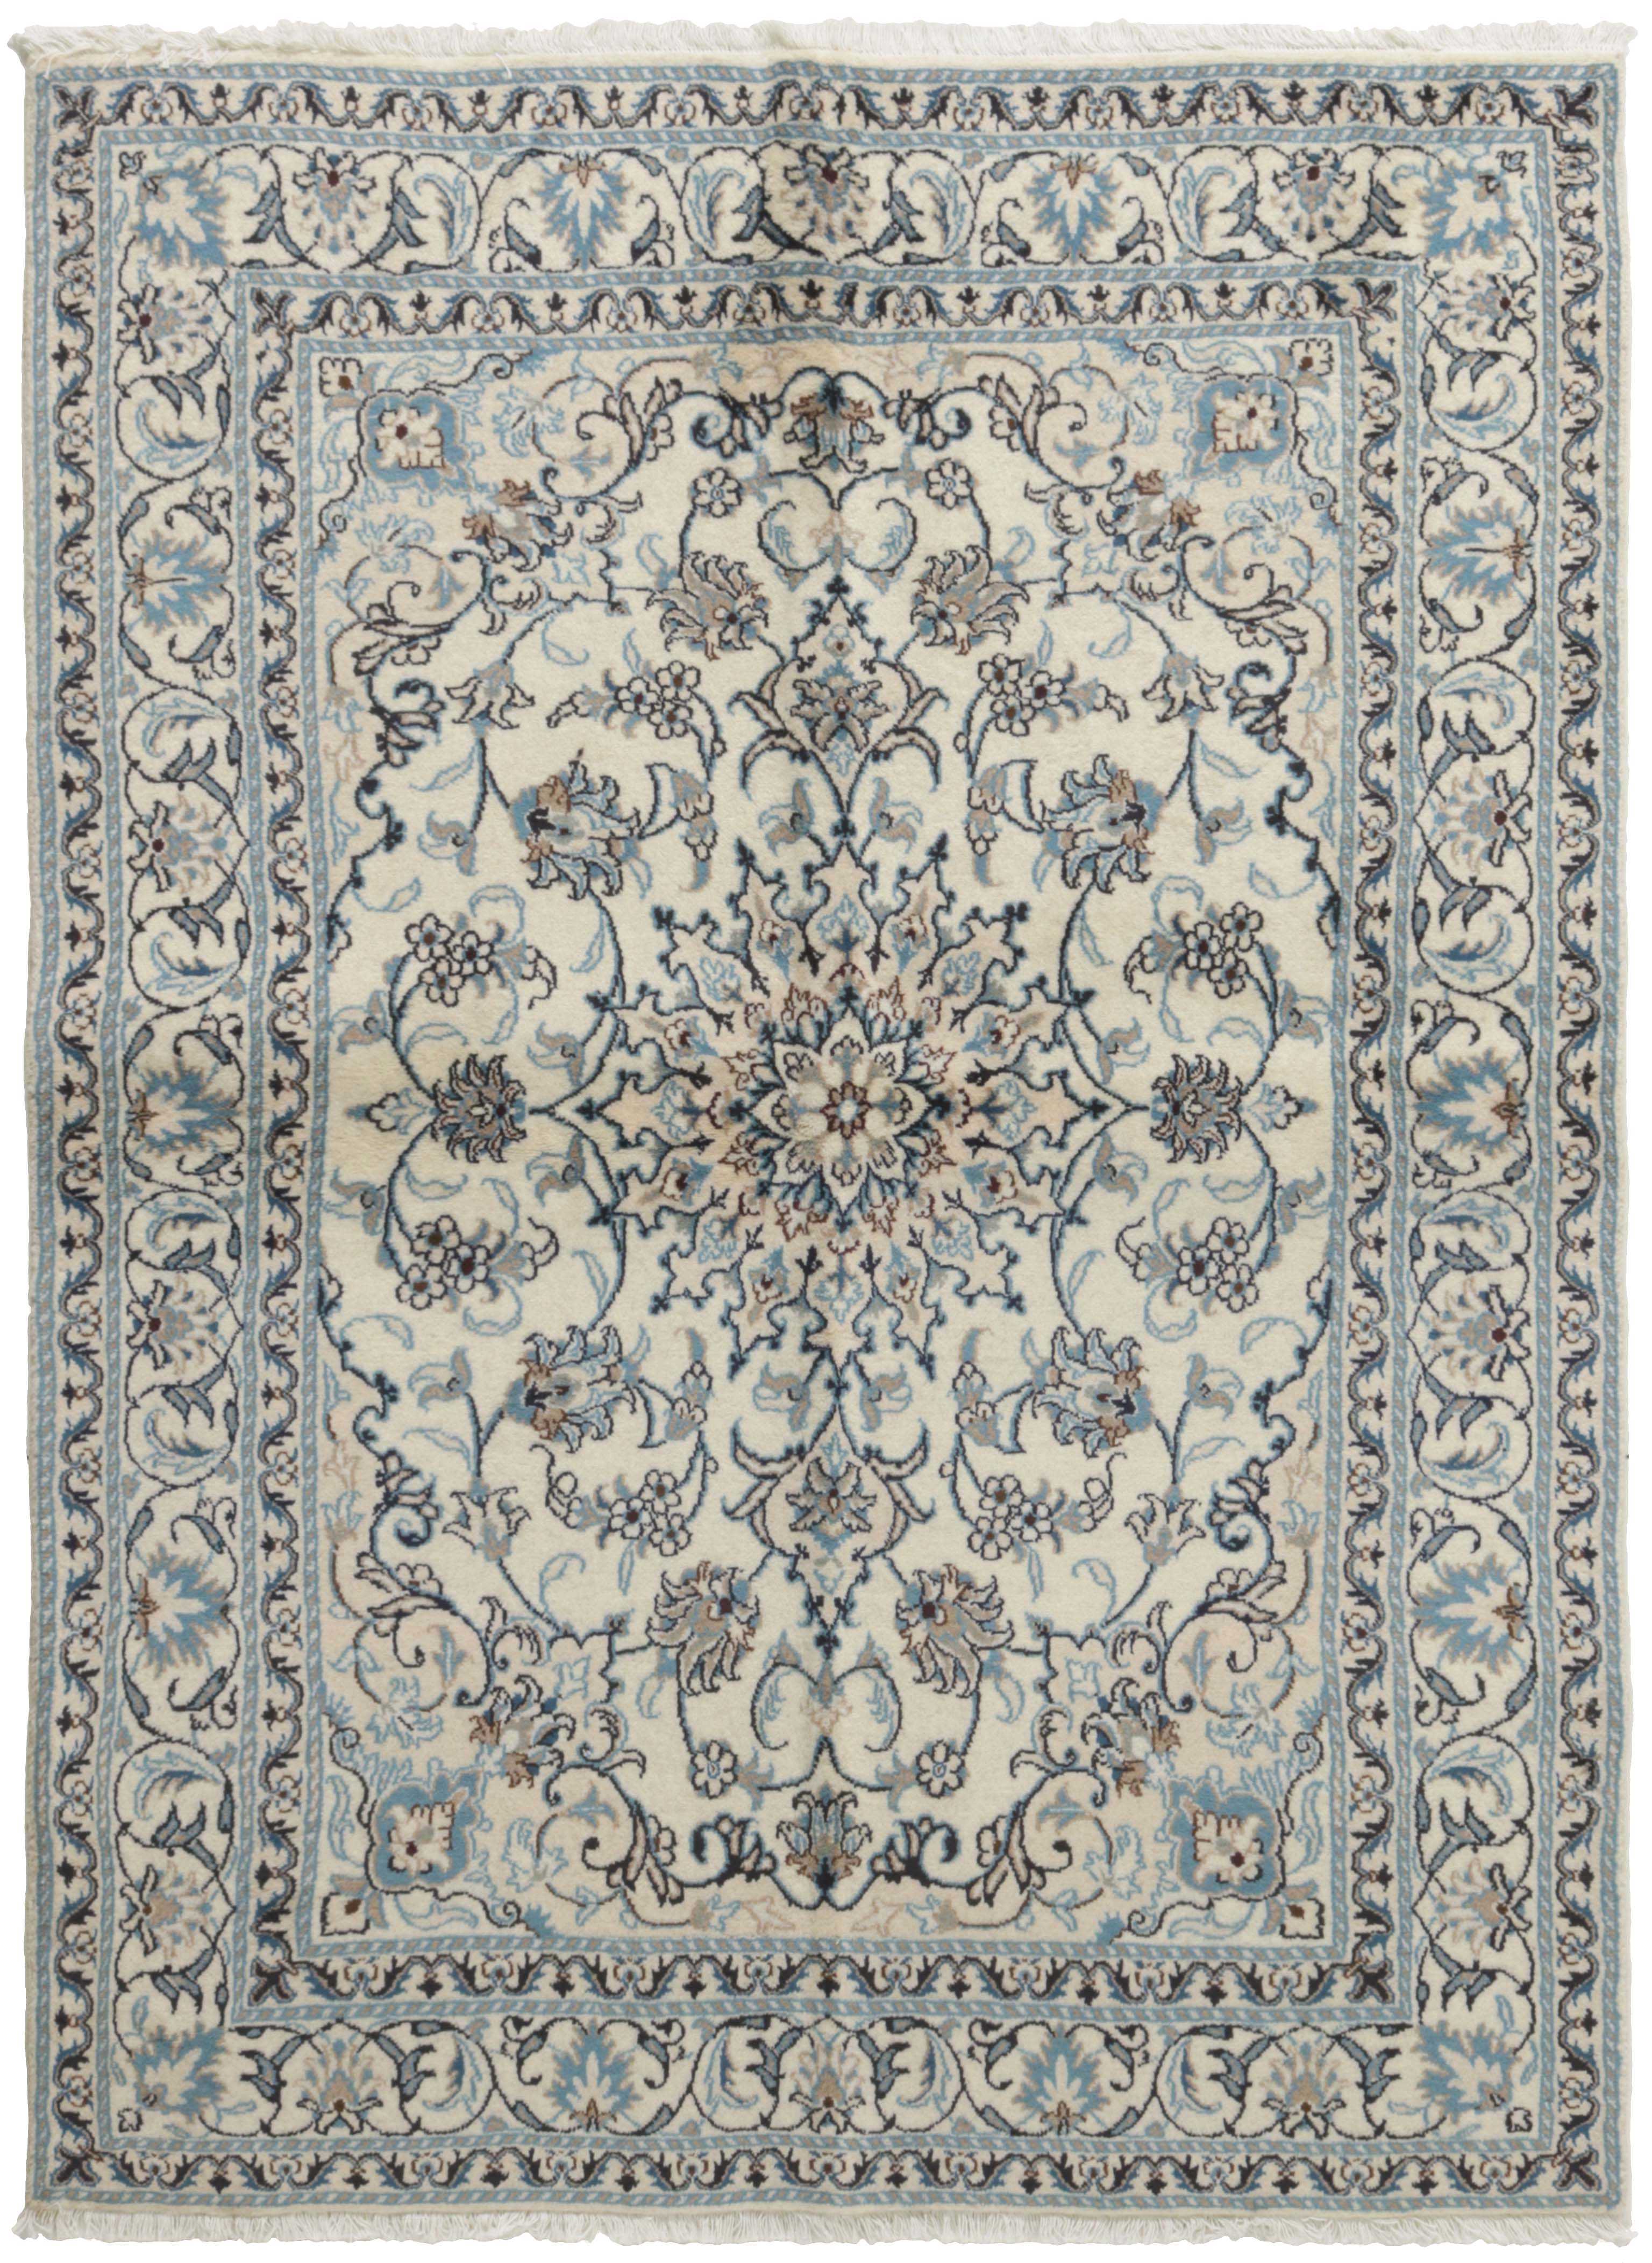 authentic persian runner with traditional floral pattern in black, blue and red